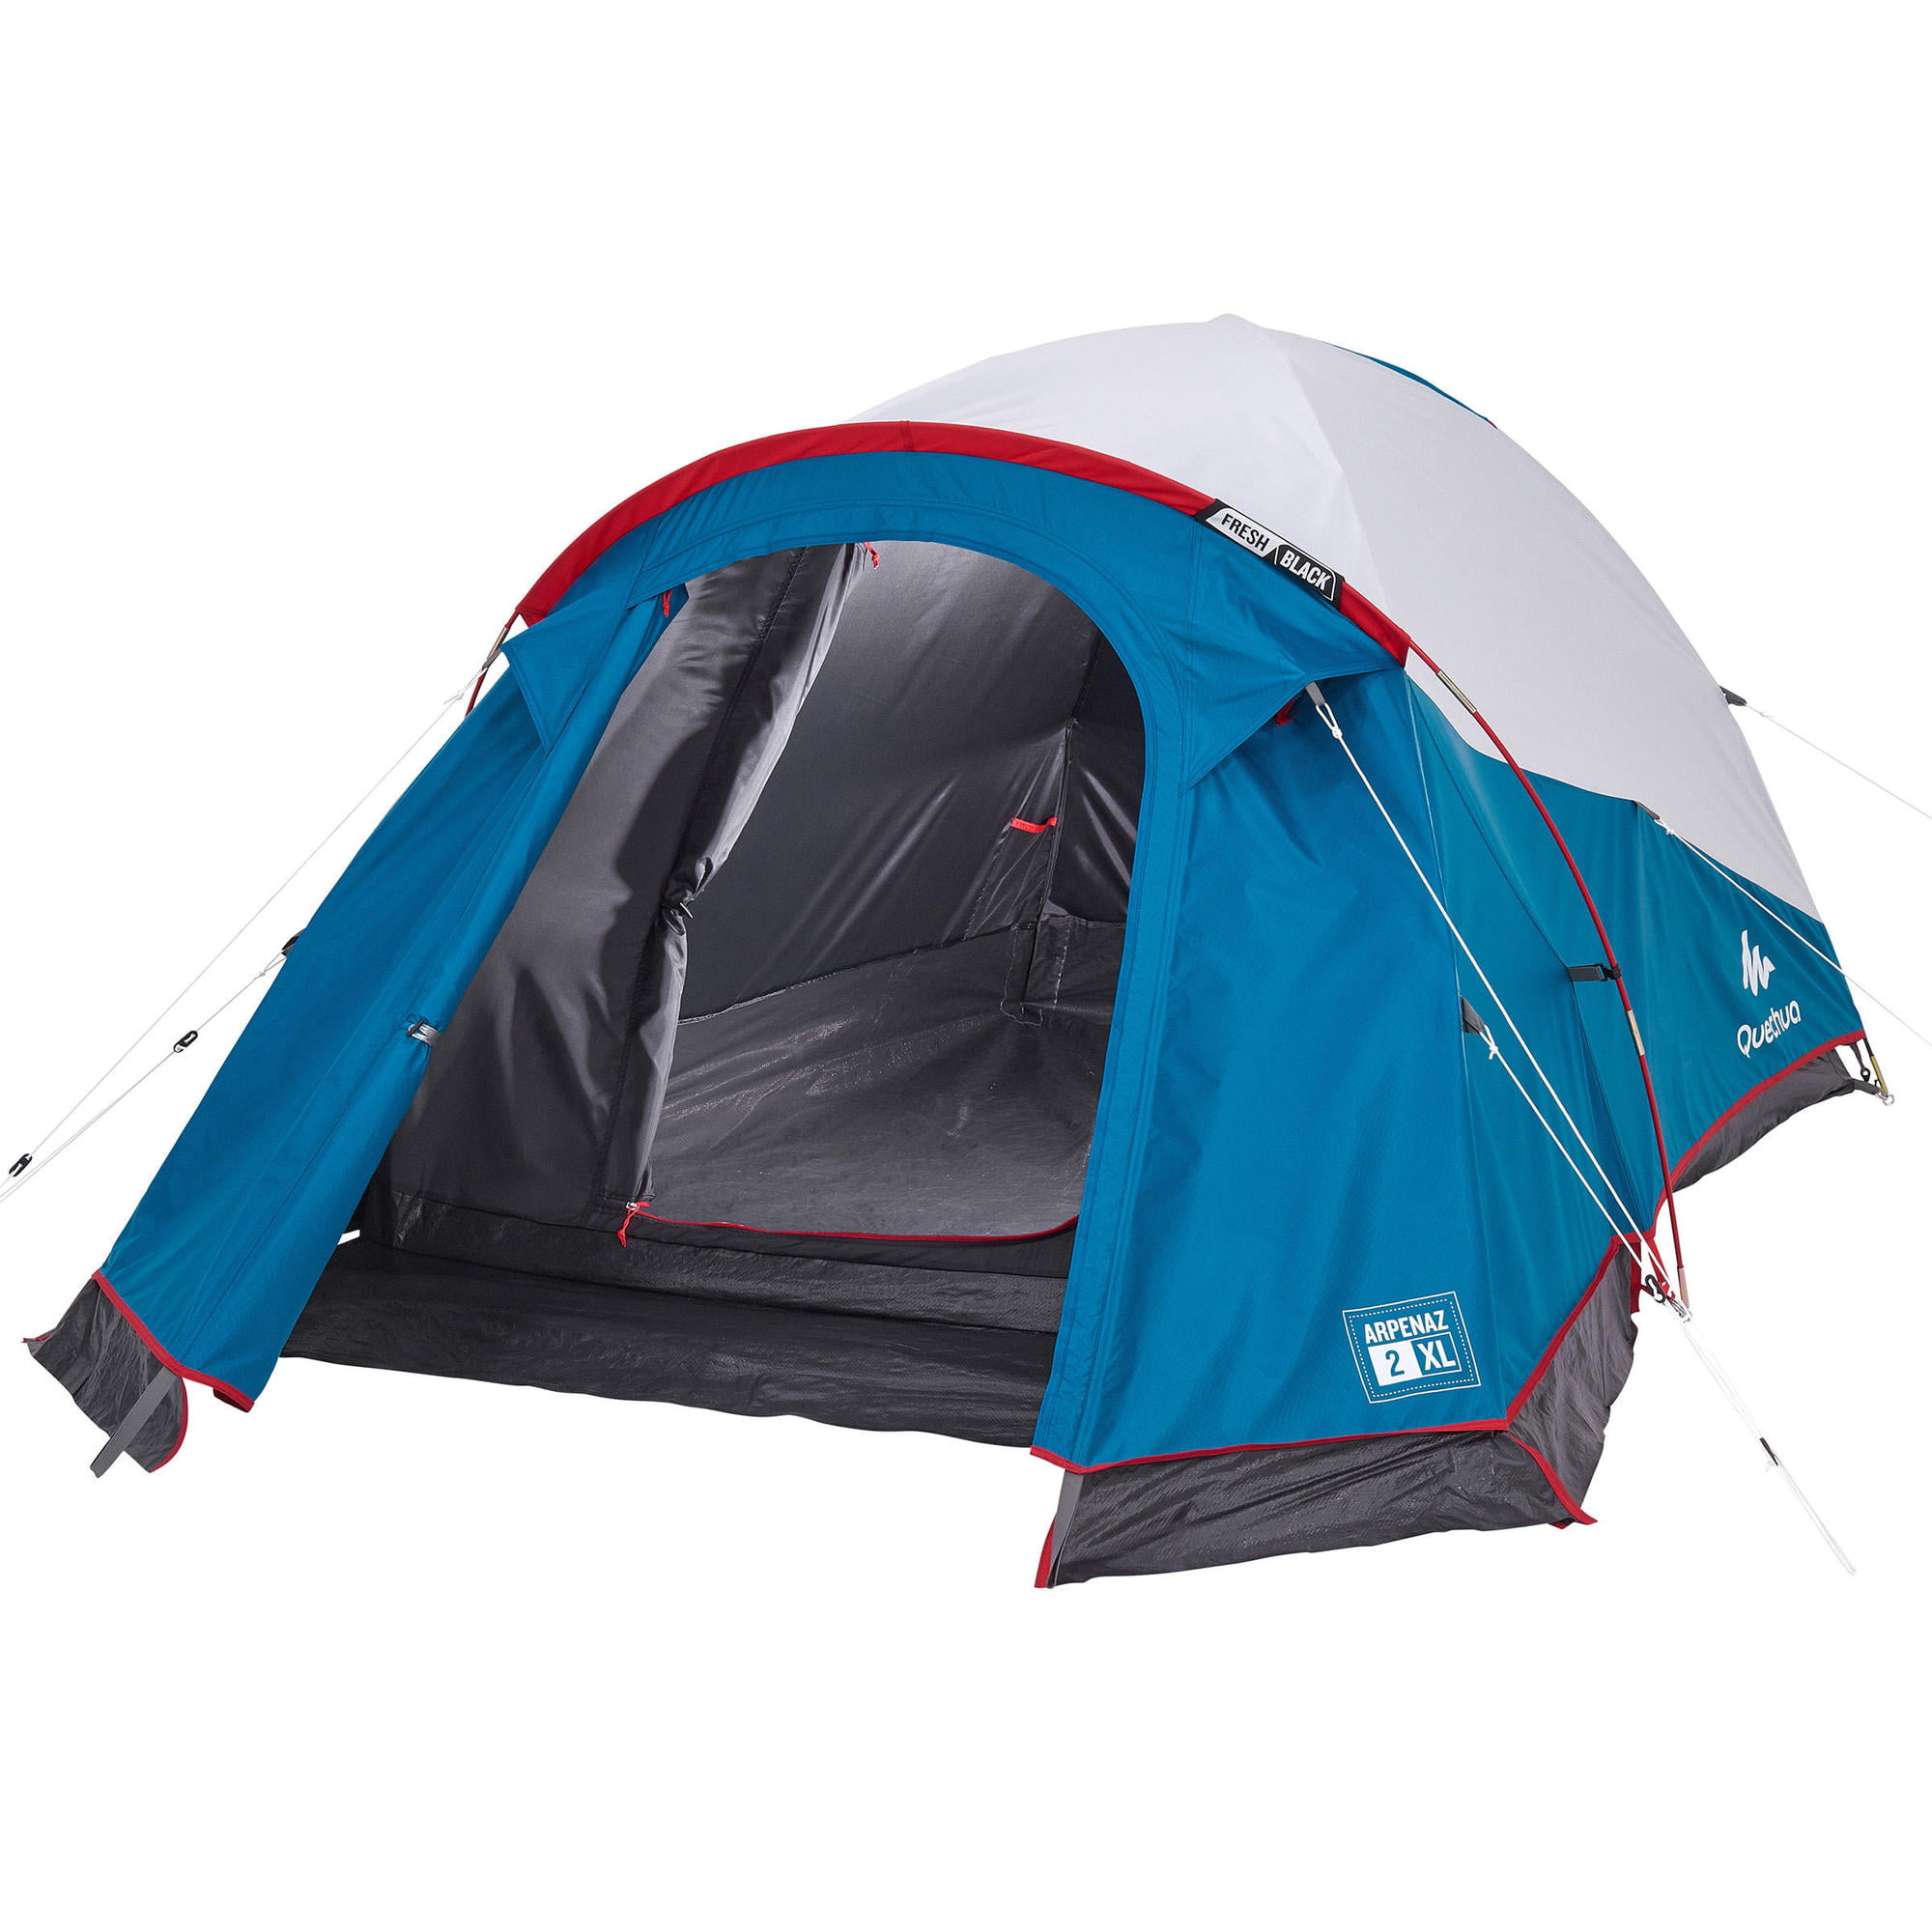 Decathlon 5-Person Camping Tent 